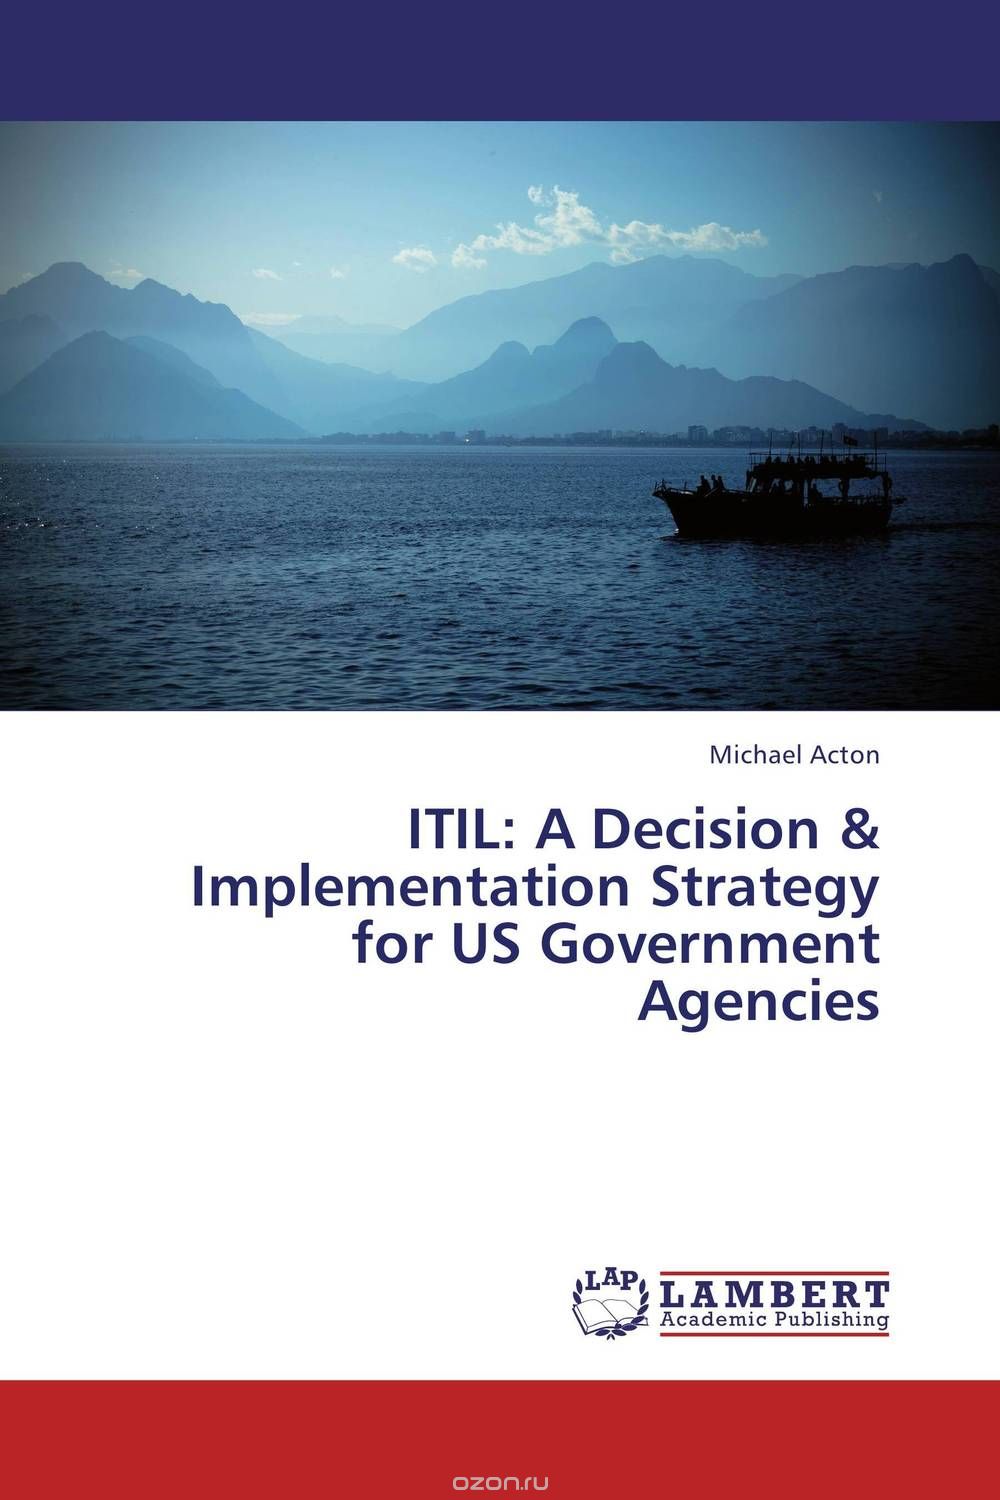 Скачать книгу "ITIL: A Decision & Implementation Strategy for US Government Agencies"